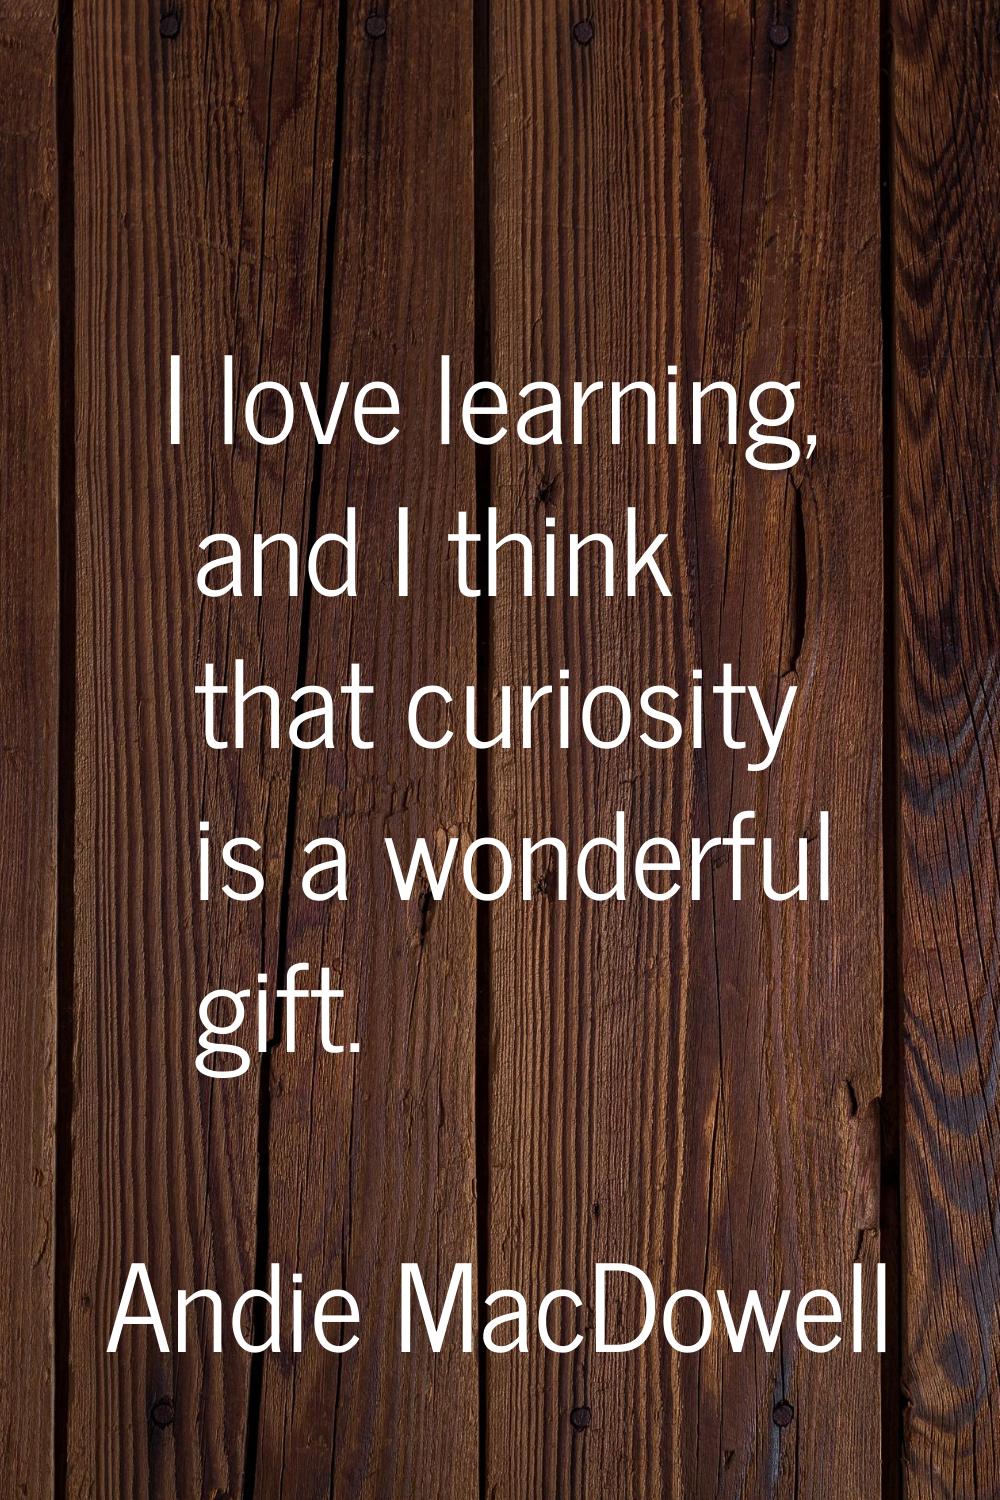 I love learning, and I think that curiosity is a wonderful gift.